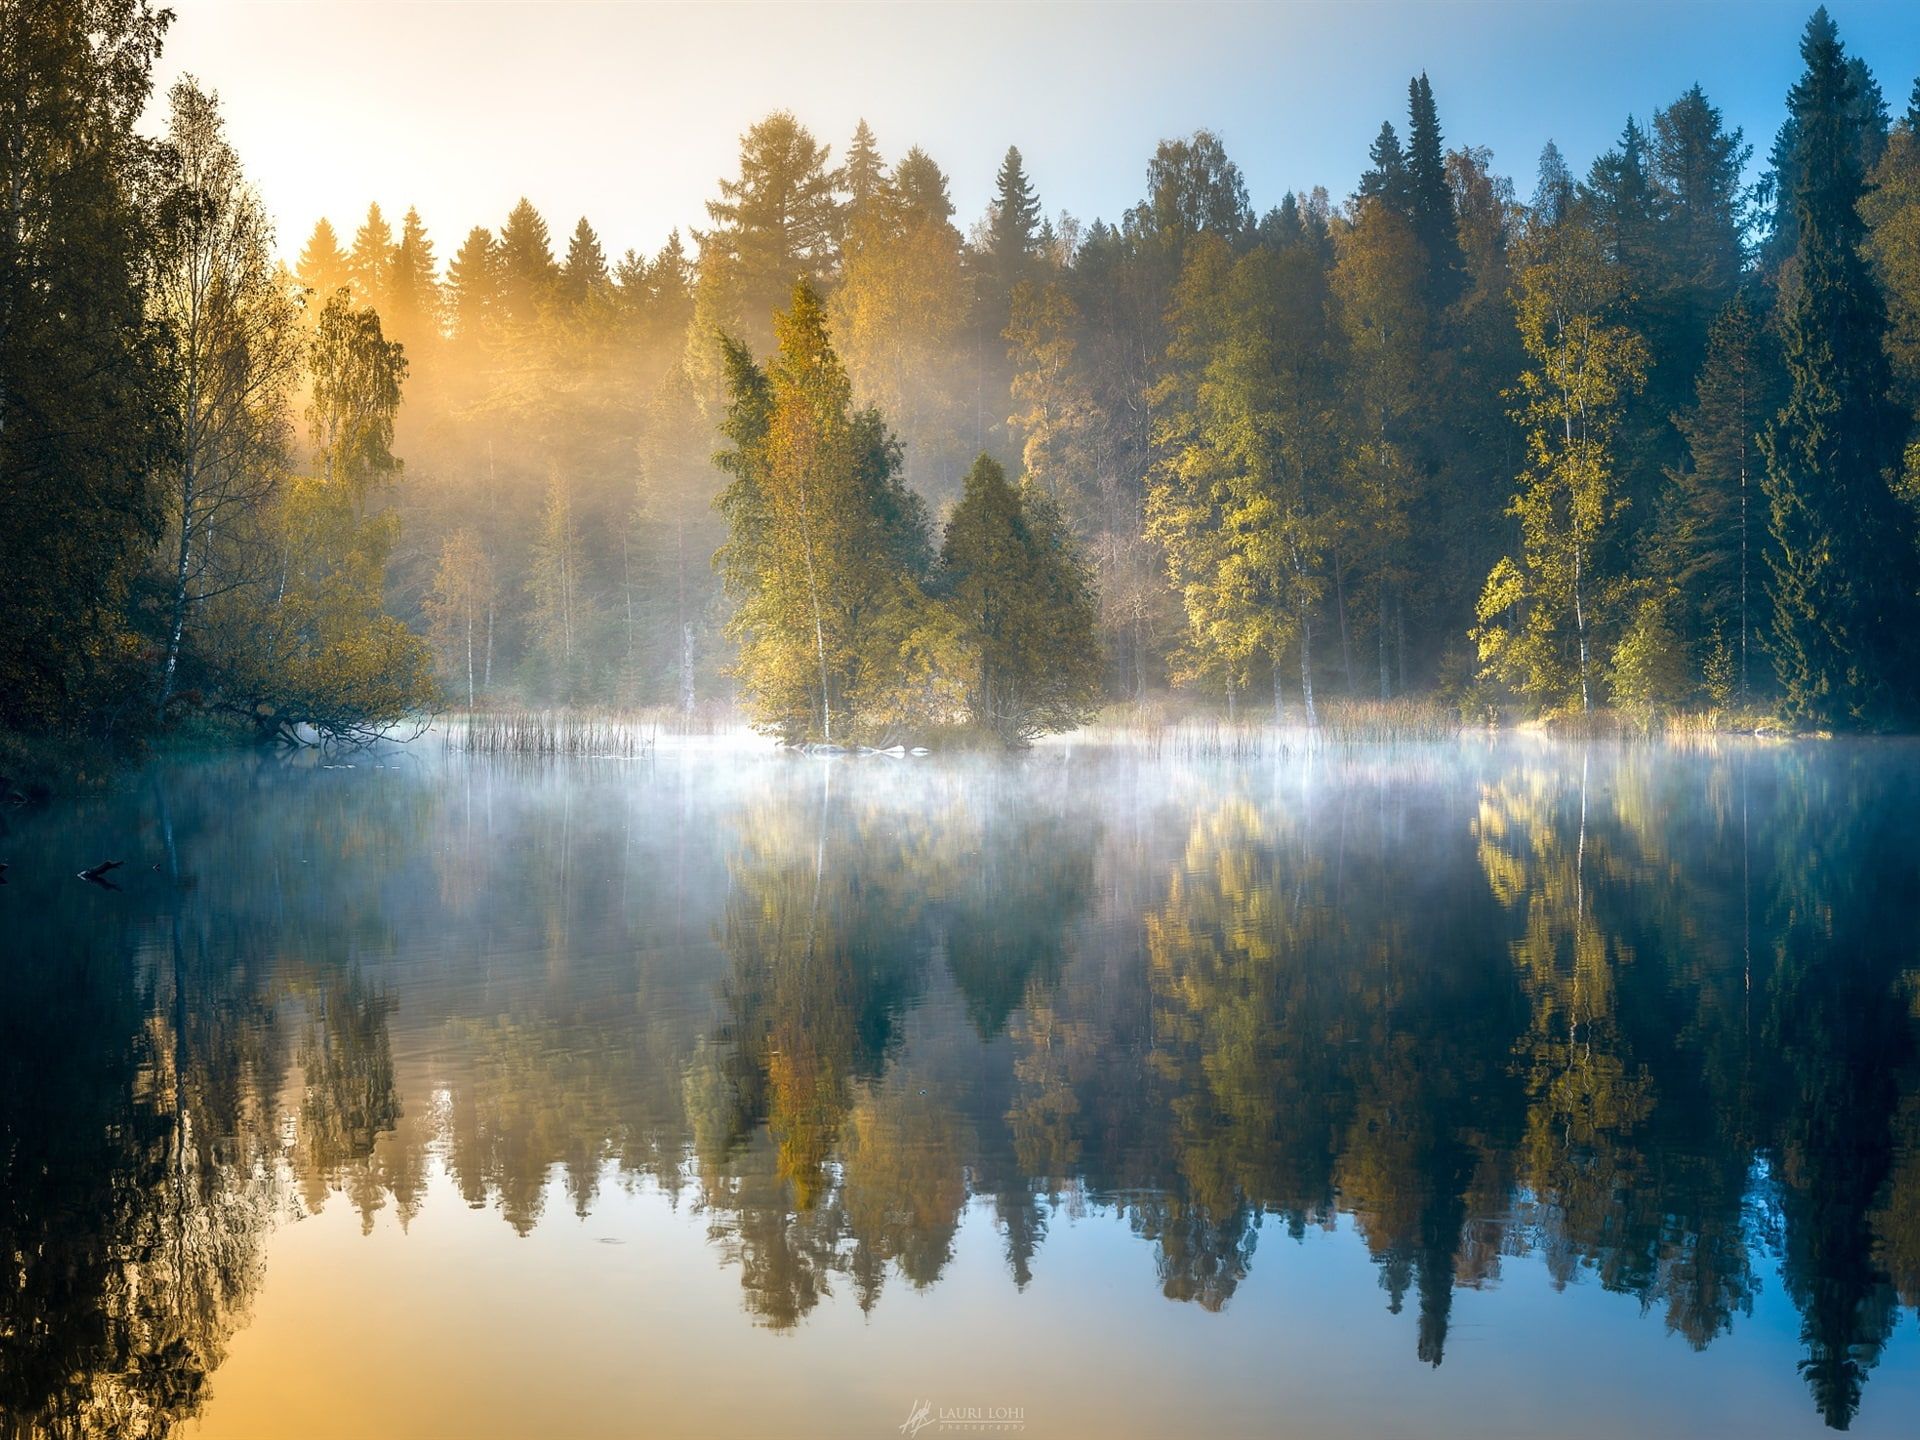 Morning forest, fog, lake, trees, autumn, Finland #Morning #Forest #Fog # Lake #Trees #Autumn #Finland P #wallpaper. Beautiful morning, Lake landscape, Forest